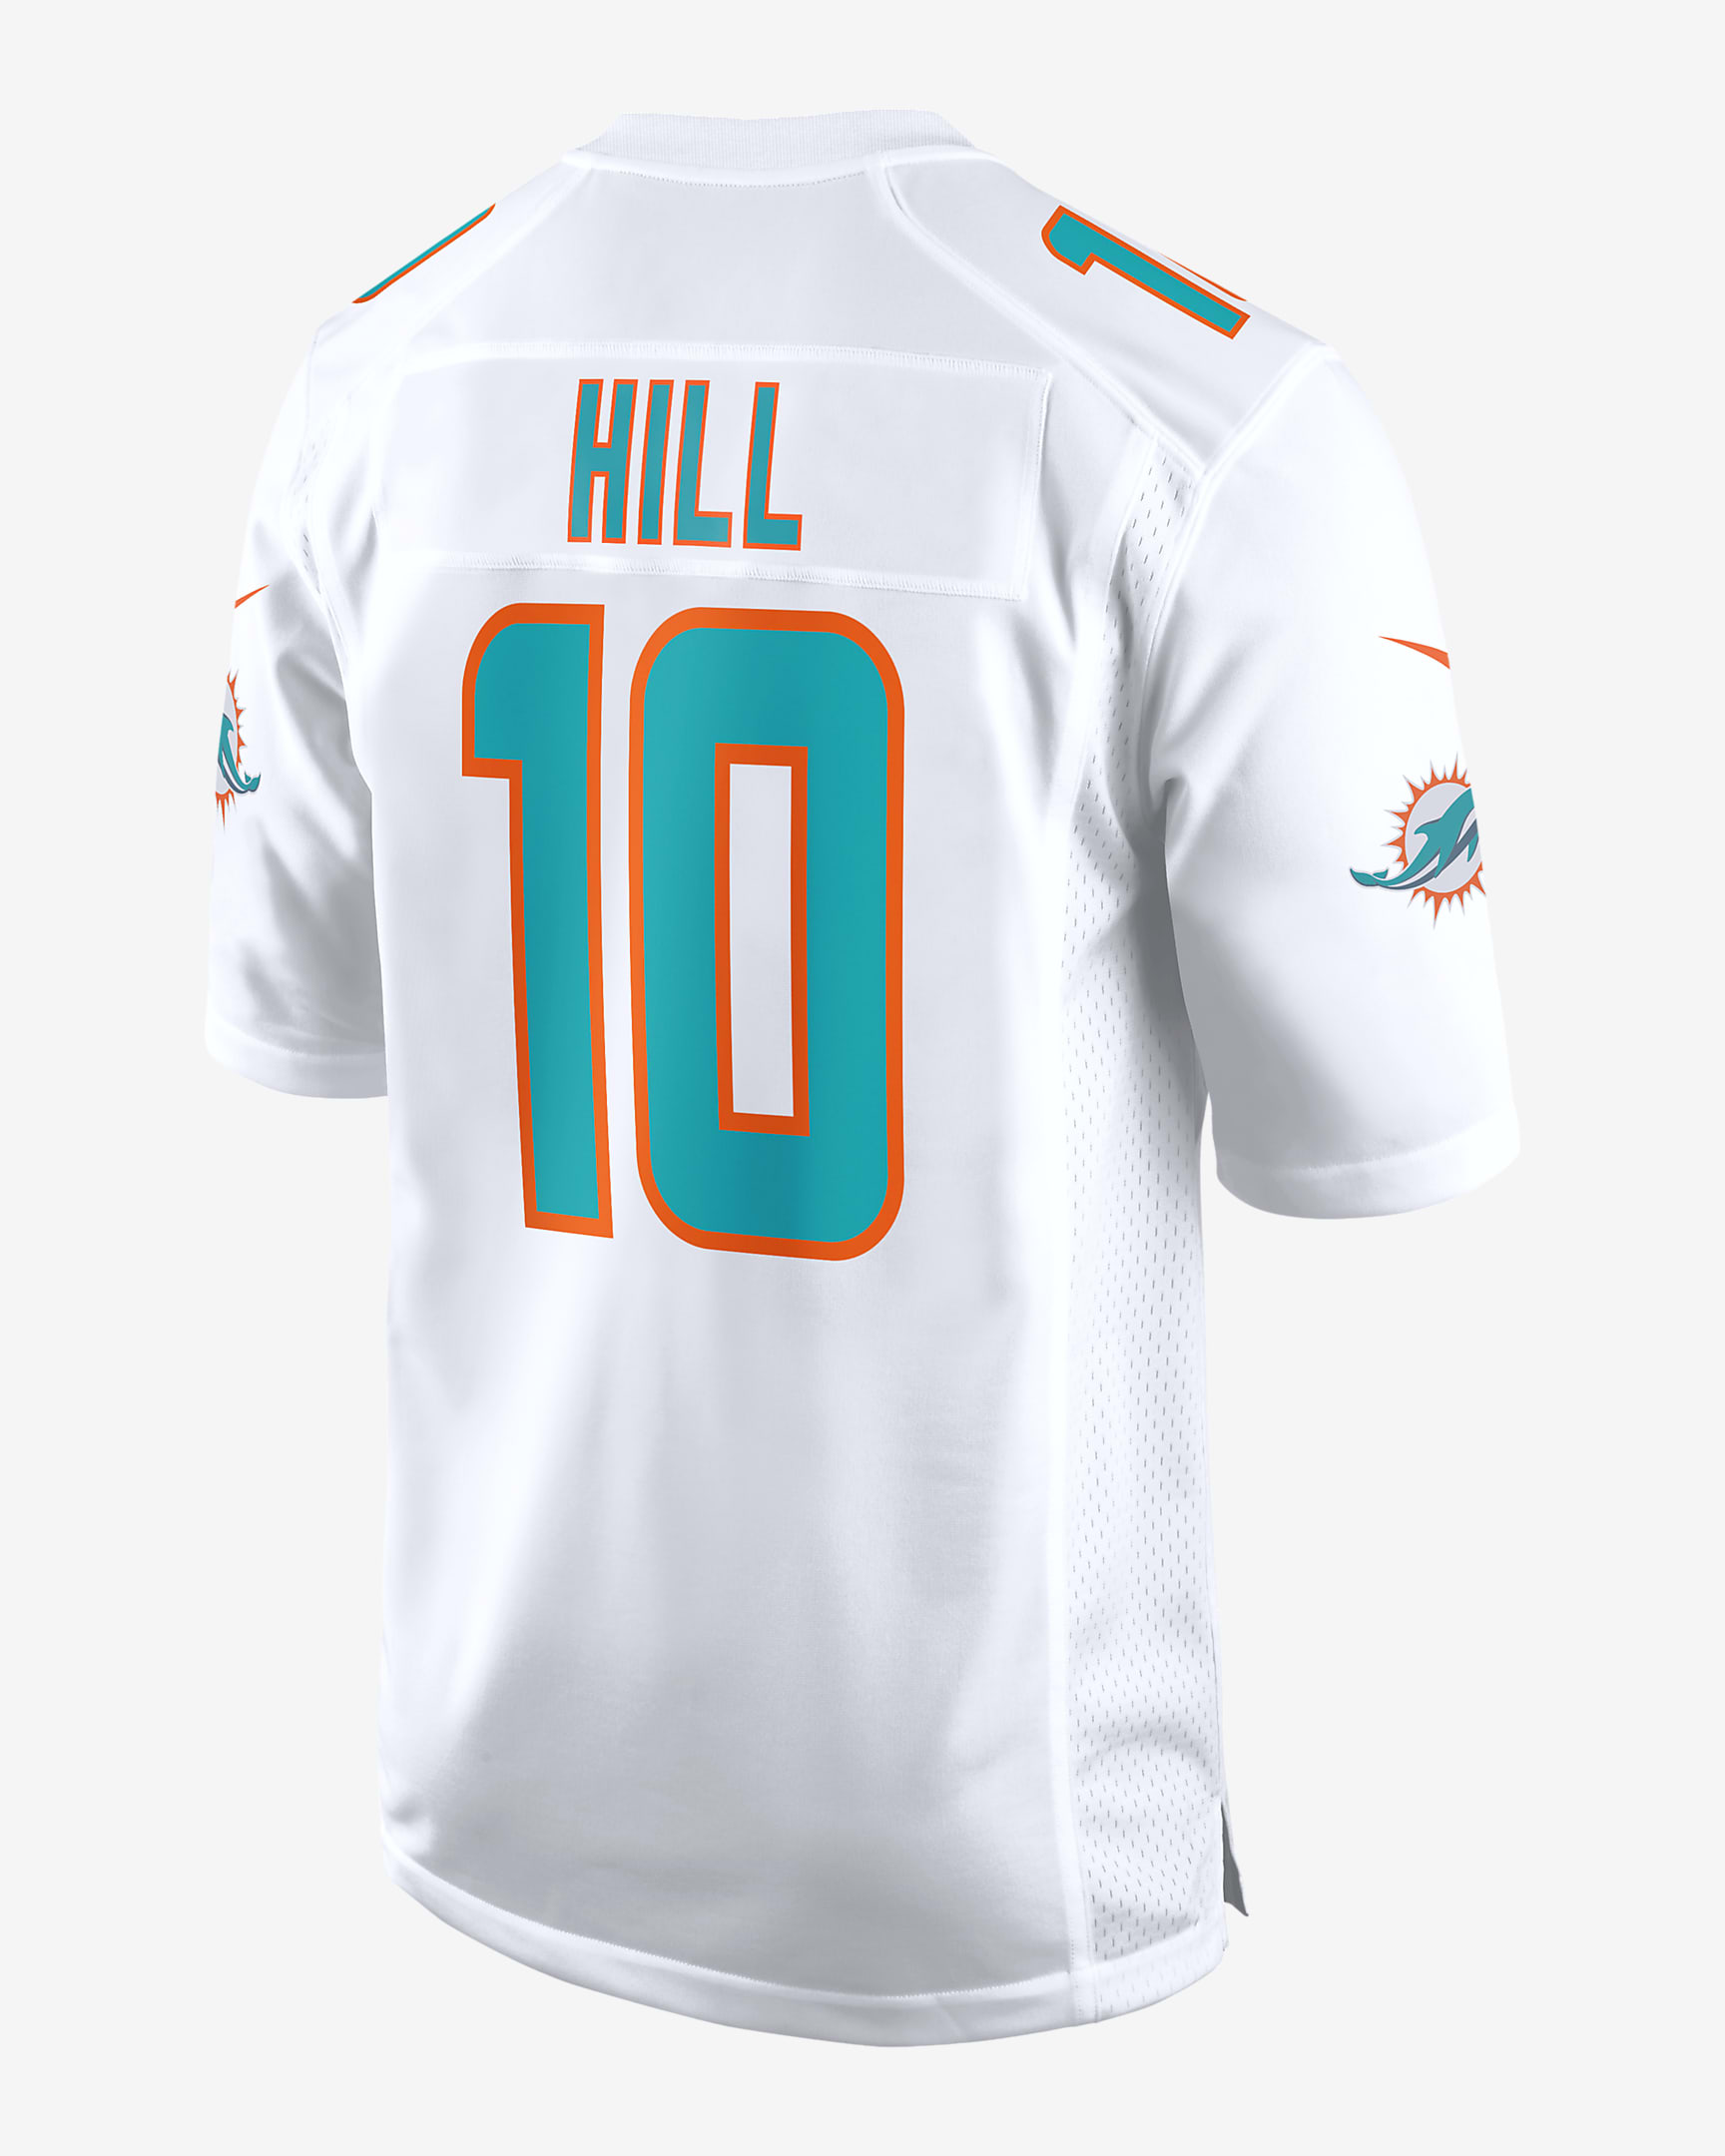 NFL Miami Dolphins (Tyreek Hill) Men's Game Football Jersey. Nike.com